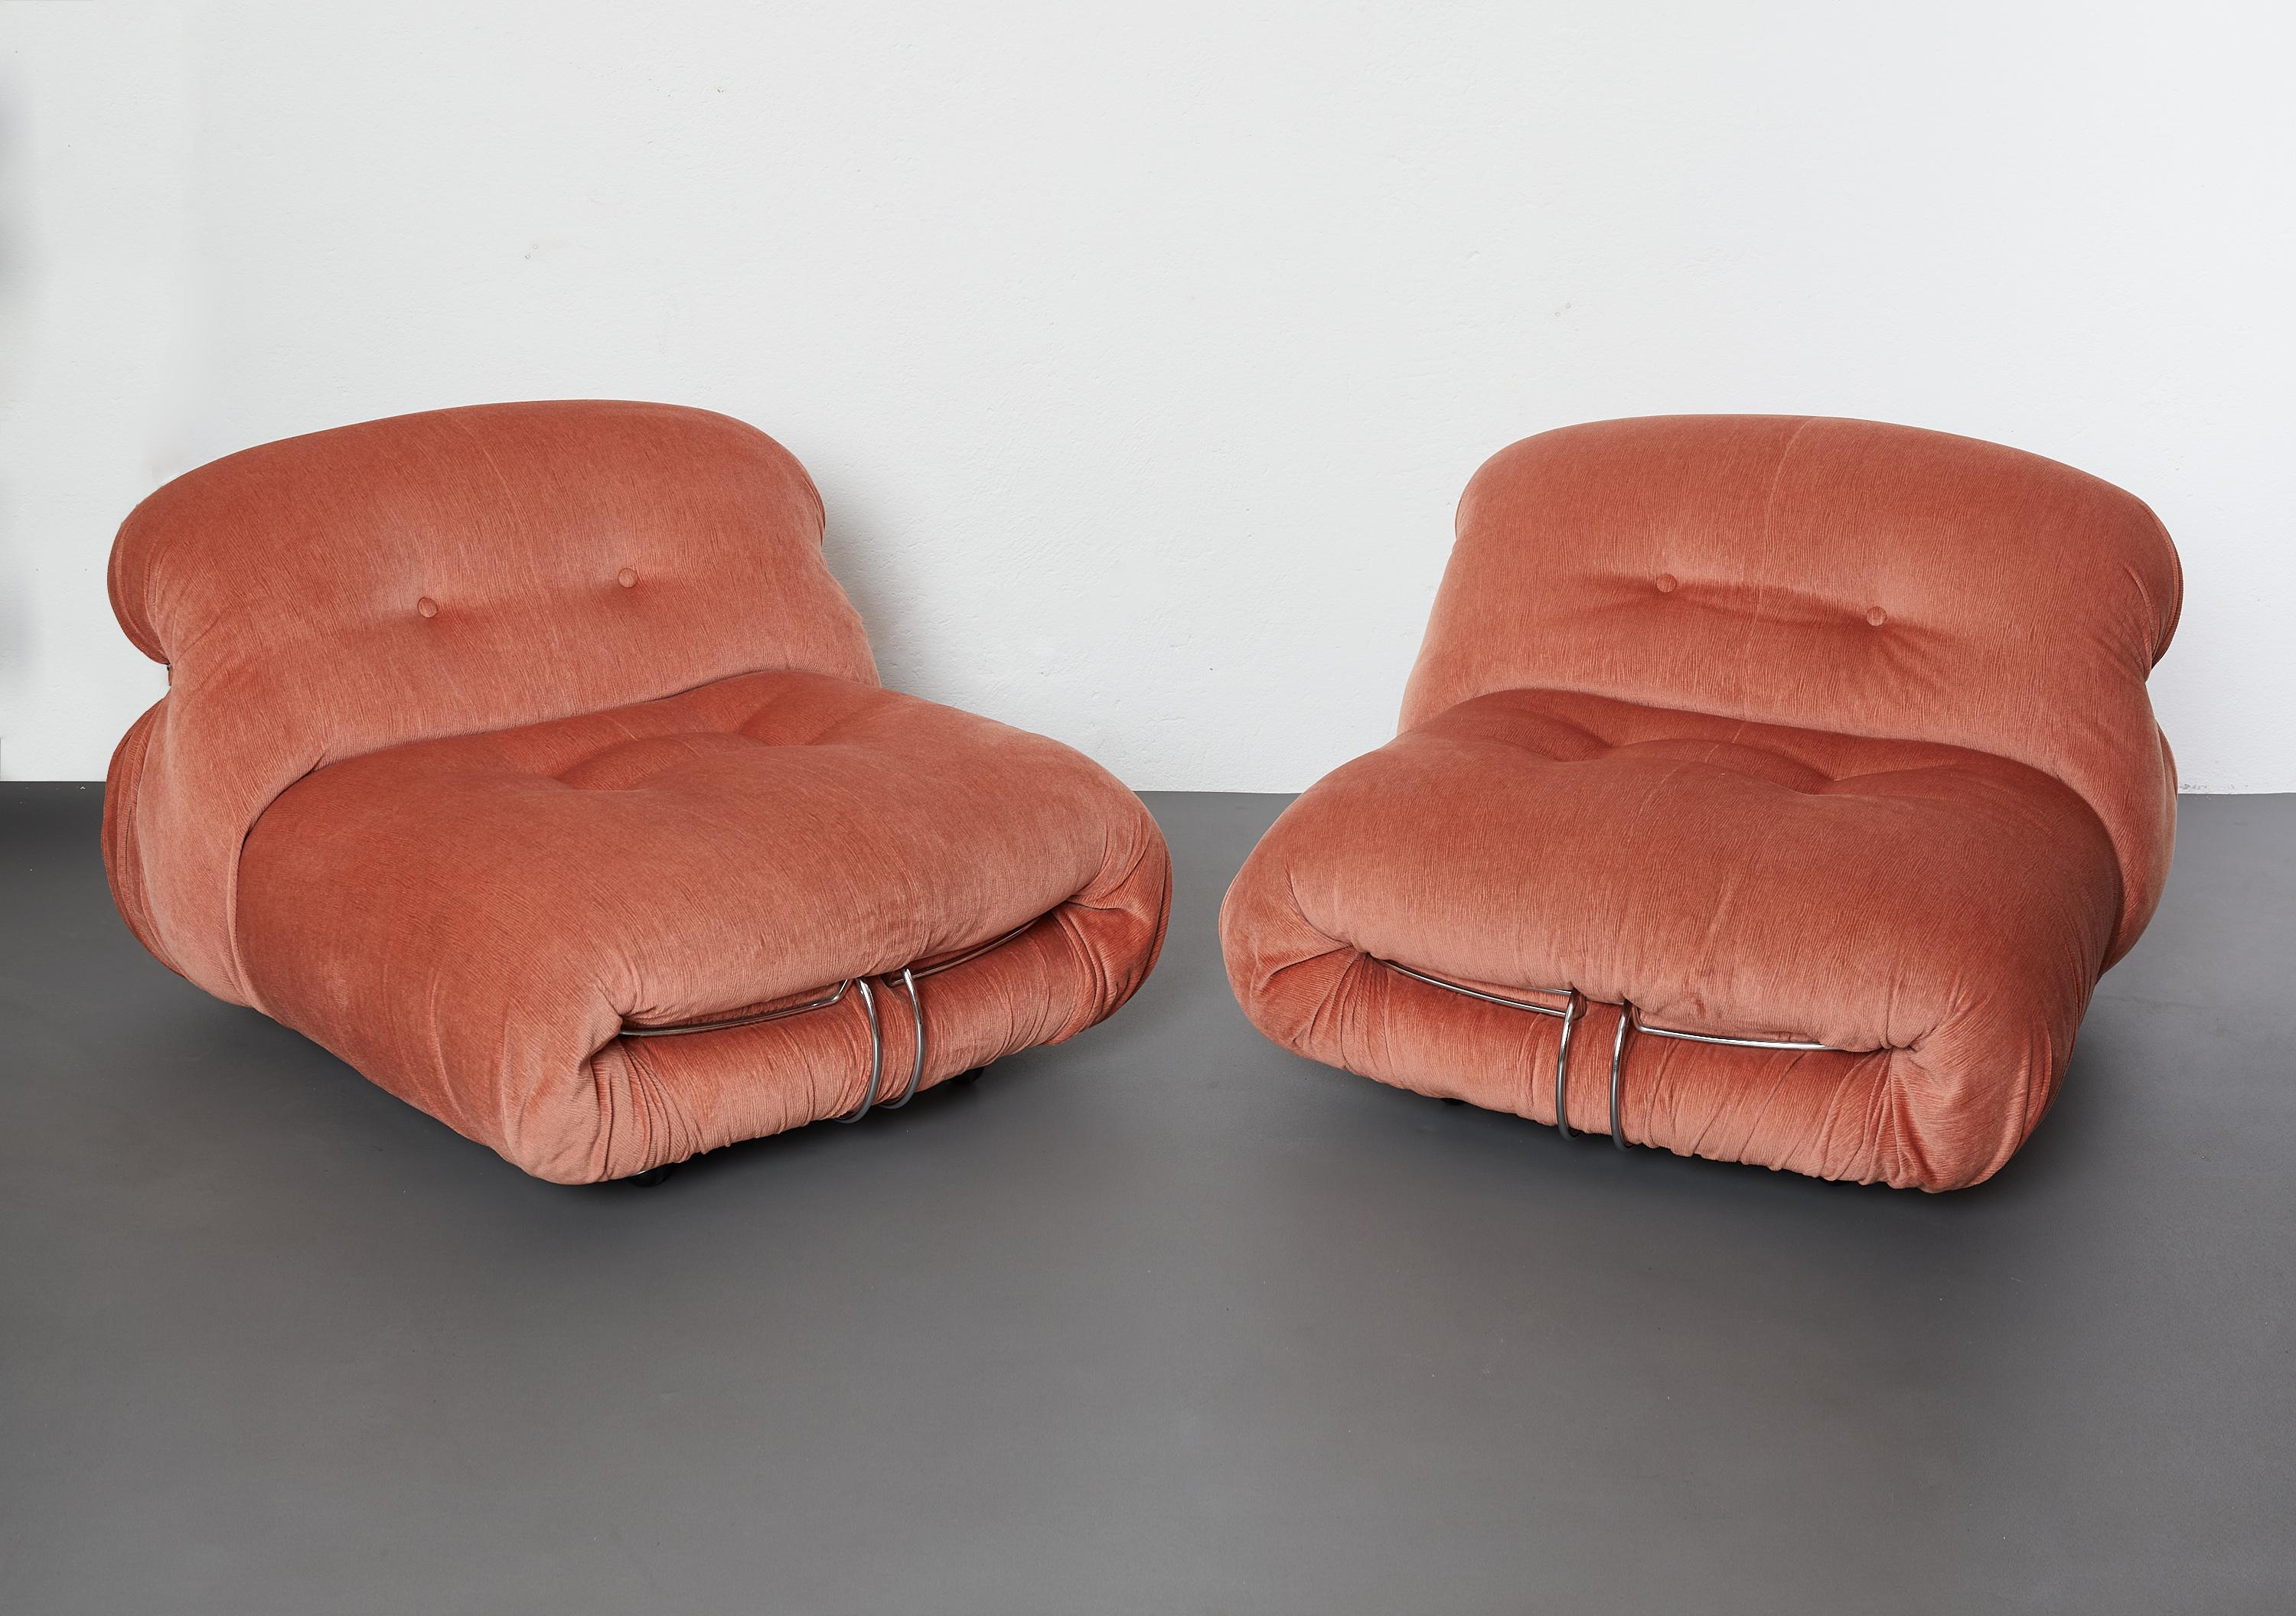 Pair of iconic Soriana lounge chairs by Afra and Tobia Scarpa for Cassina 1970.

The lounge chairs are upholstered in the original coral pink velvet fabric which is in very good condition. 

This textured velvet fabric with dynamic undulating